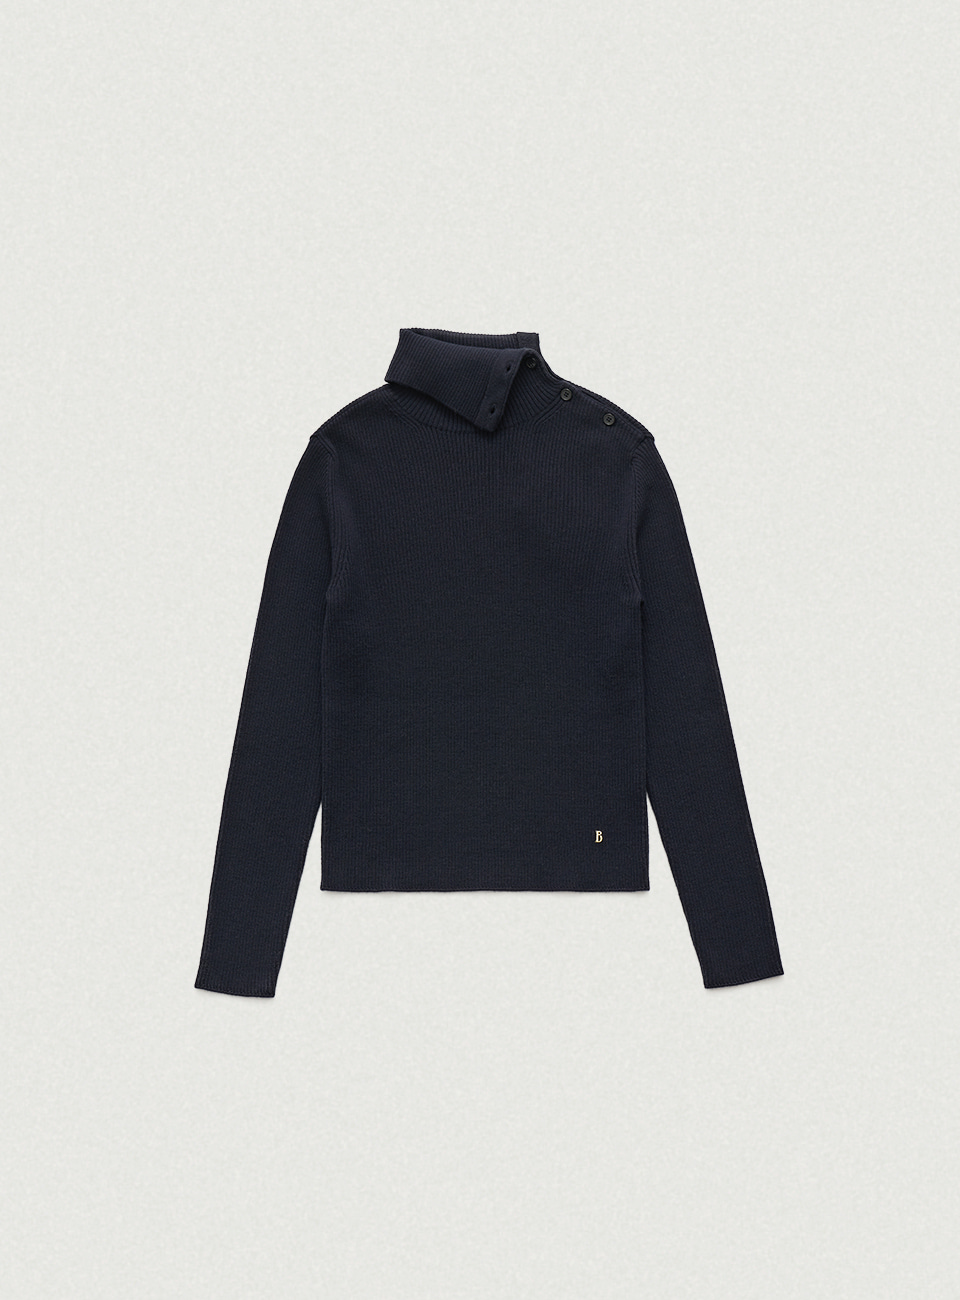 Navy Buttoned Turtleneck Knit Sweater